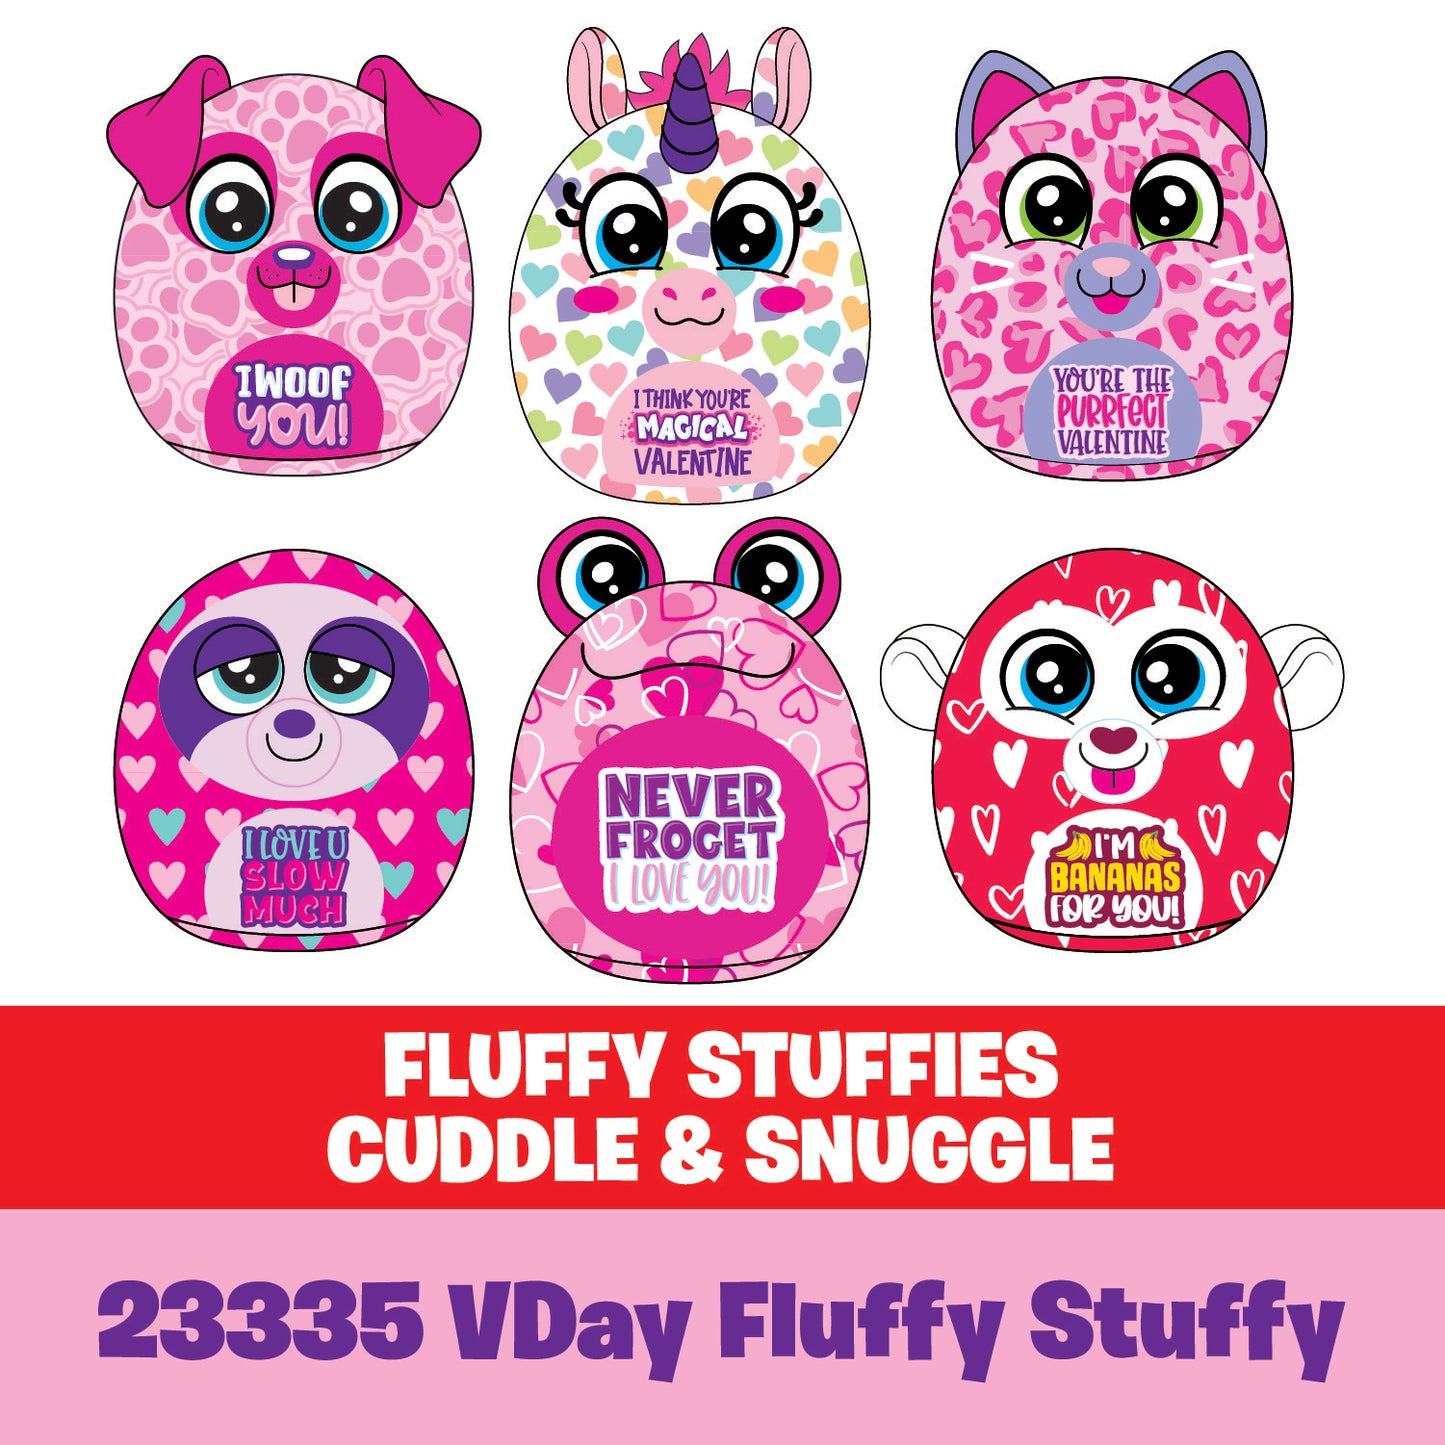 ITEM NUMBER 023335L VDAY FLUFFY STUFFY - STORE SURPLUS NO DISPLAY 6 PIECES PER PACK